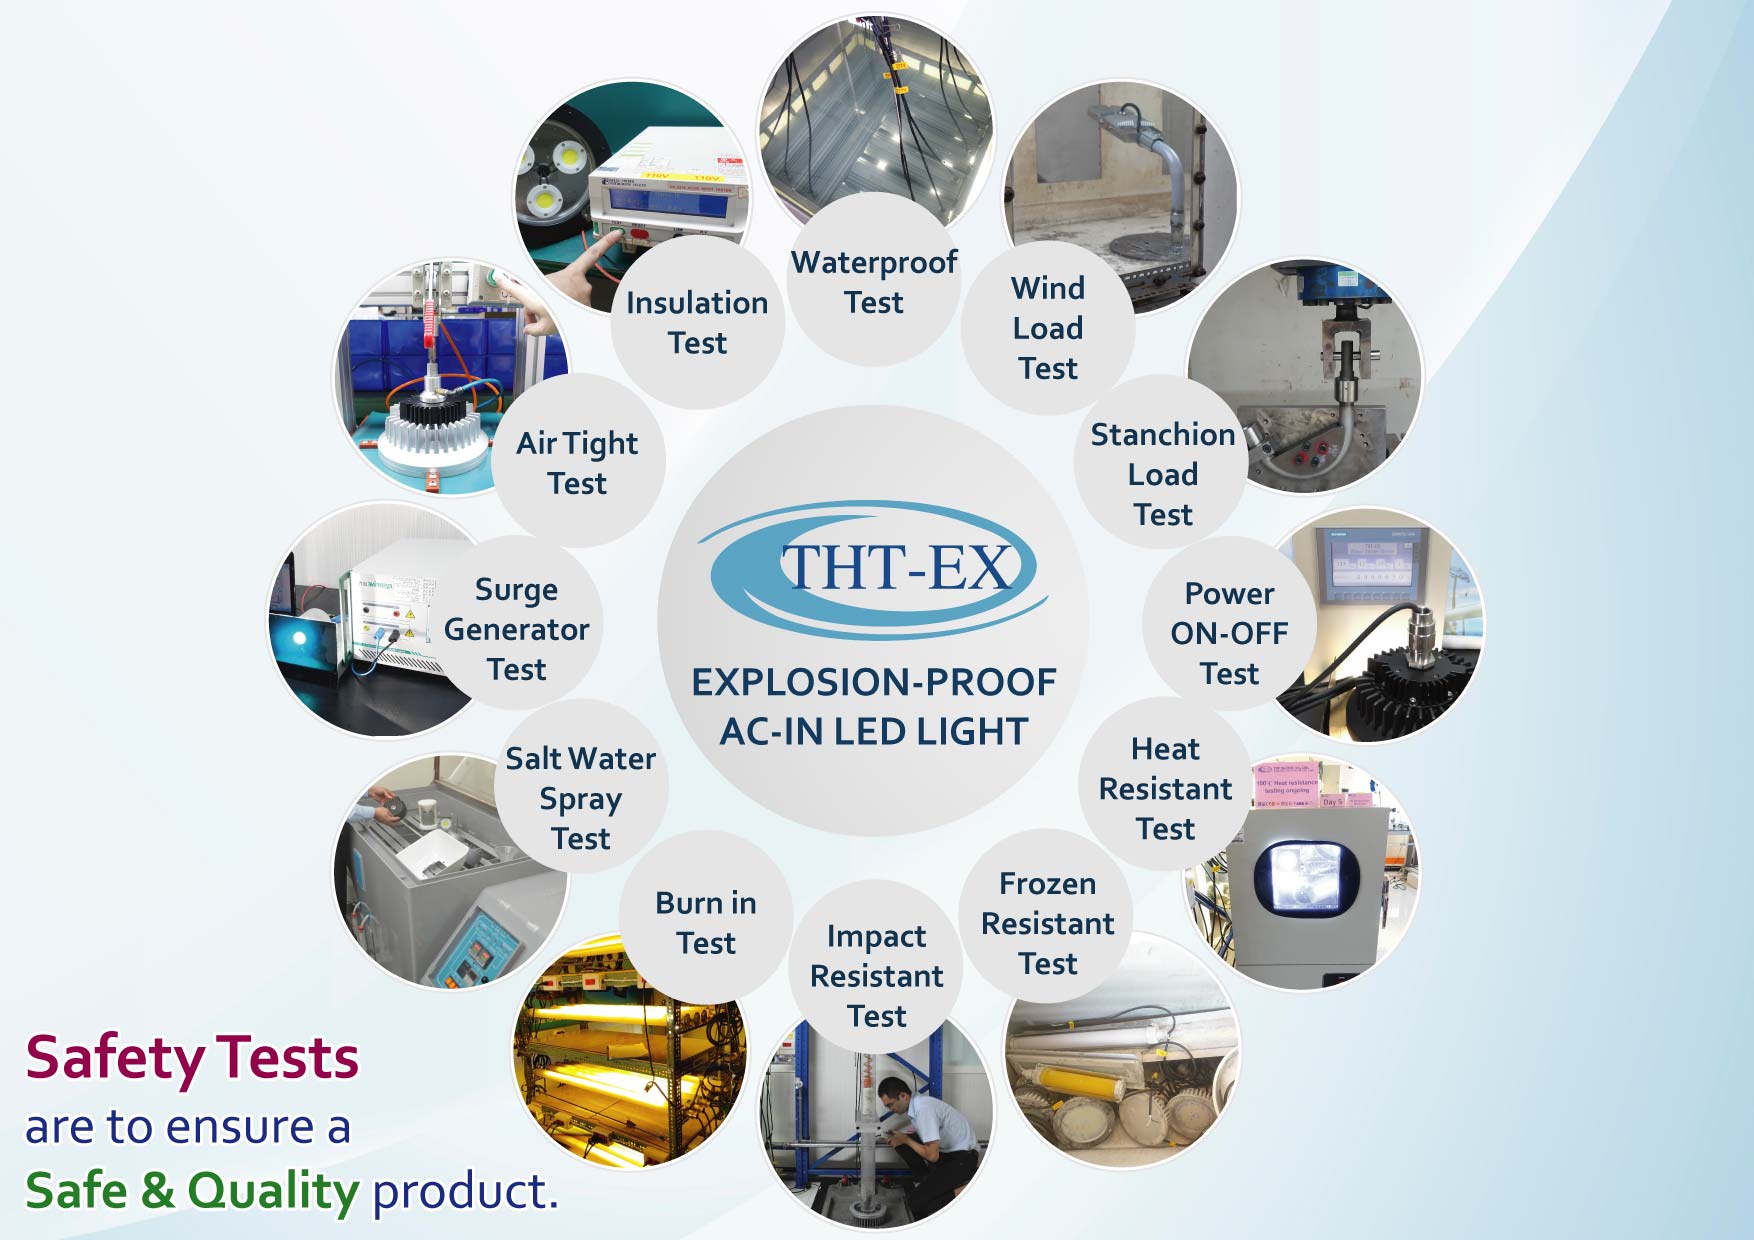  Various Safety Tests for THT-EX Explosion-proof Lights!